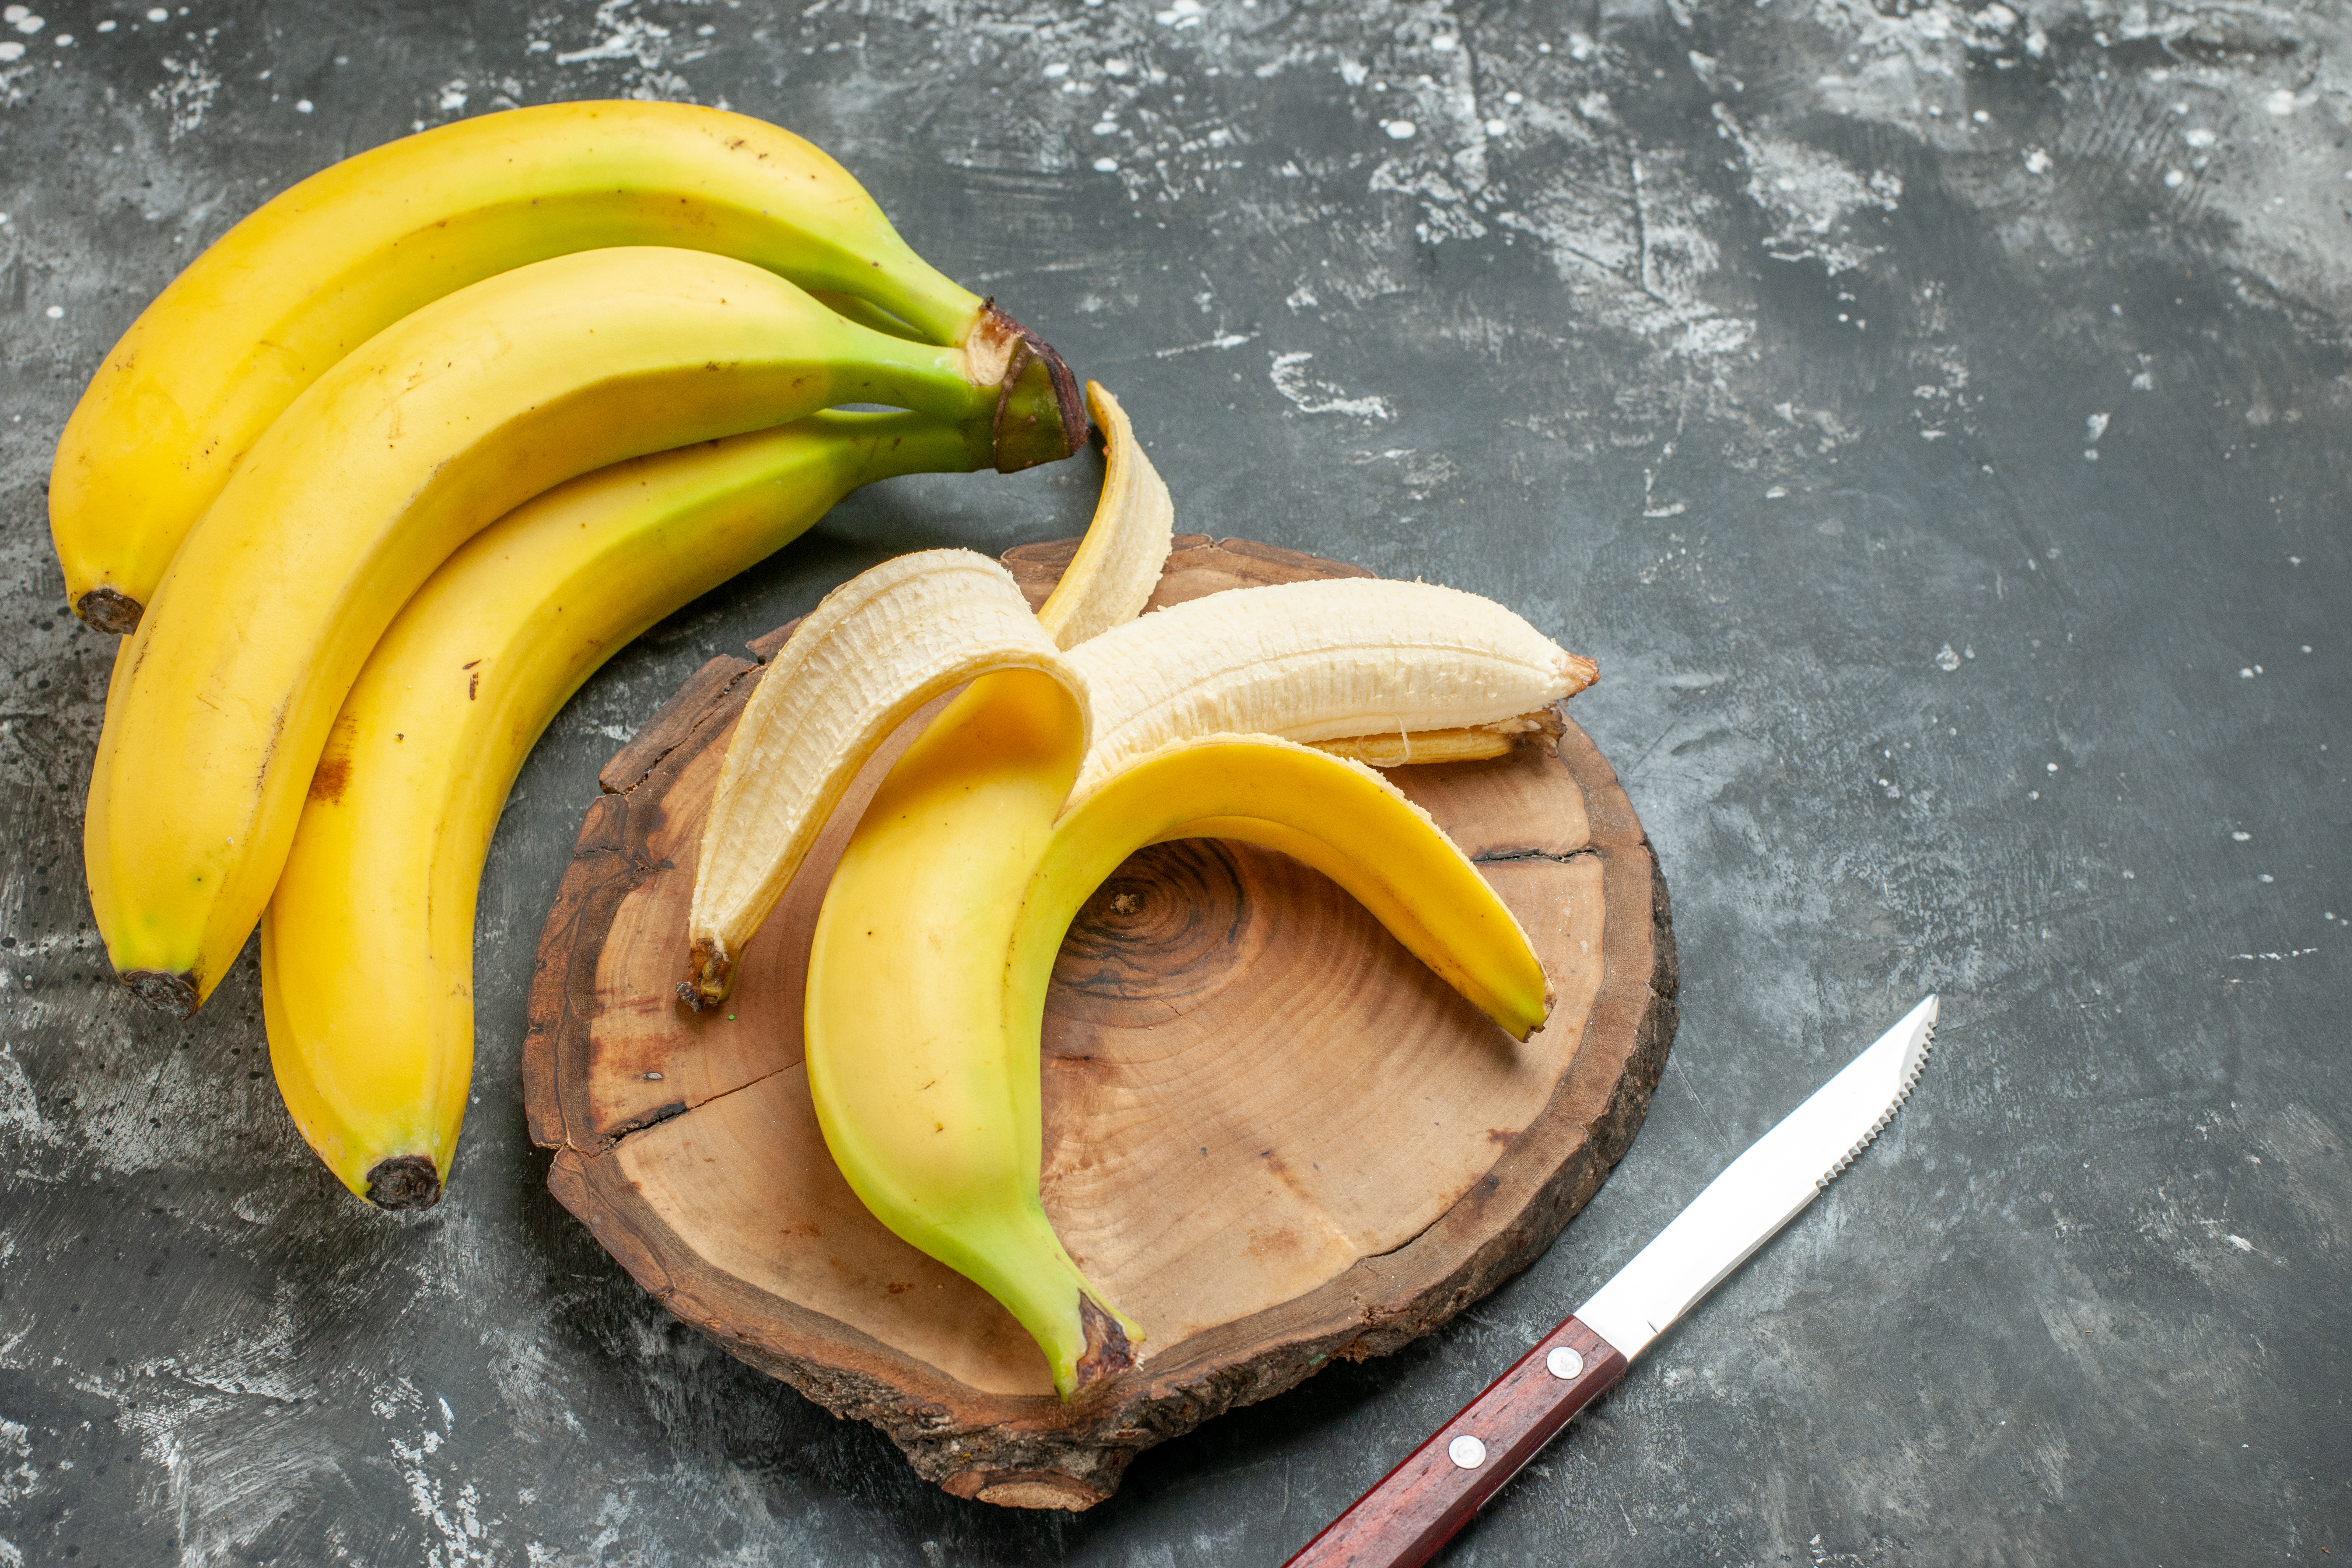 Bananas are another food that helps release energy slowly — a great snack for break time